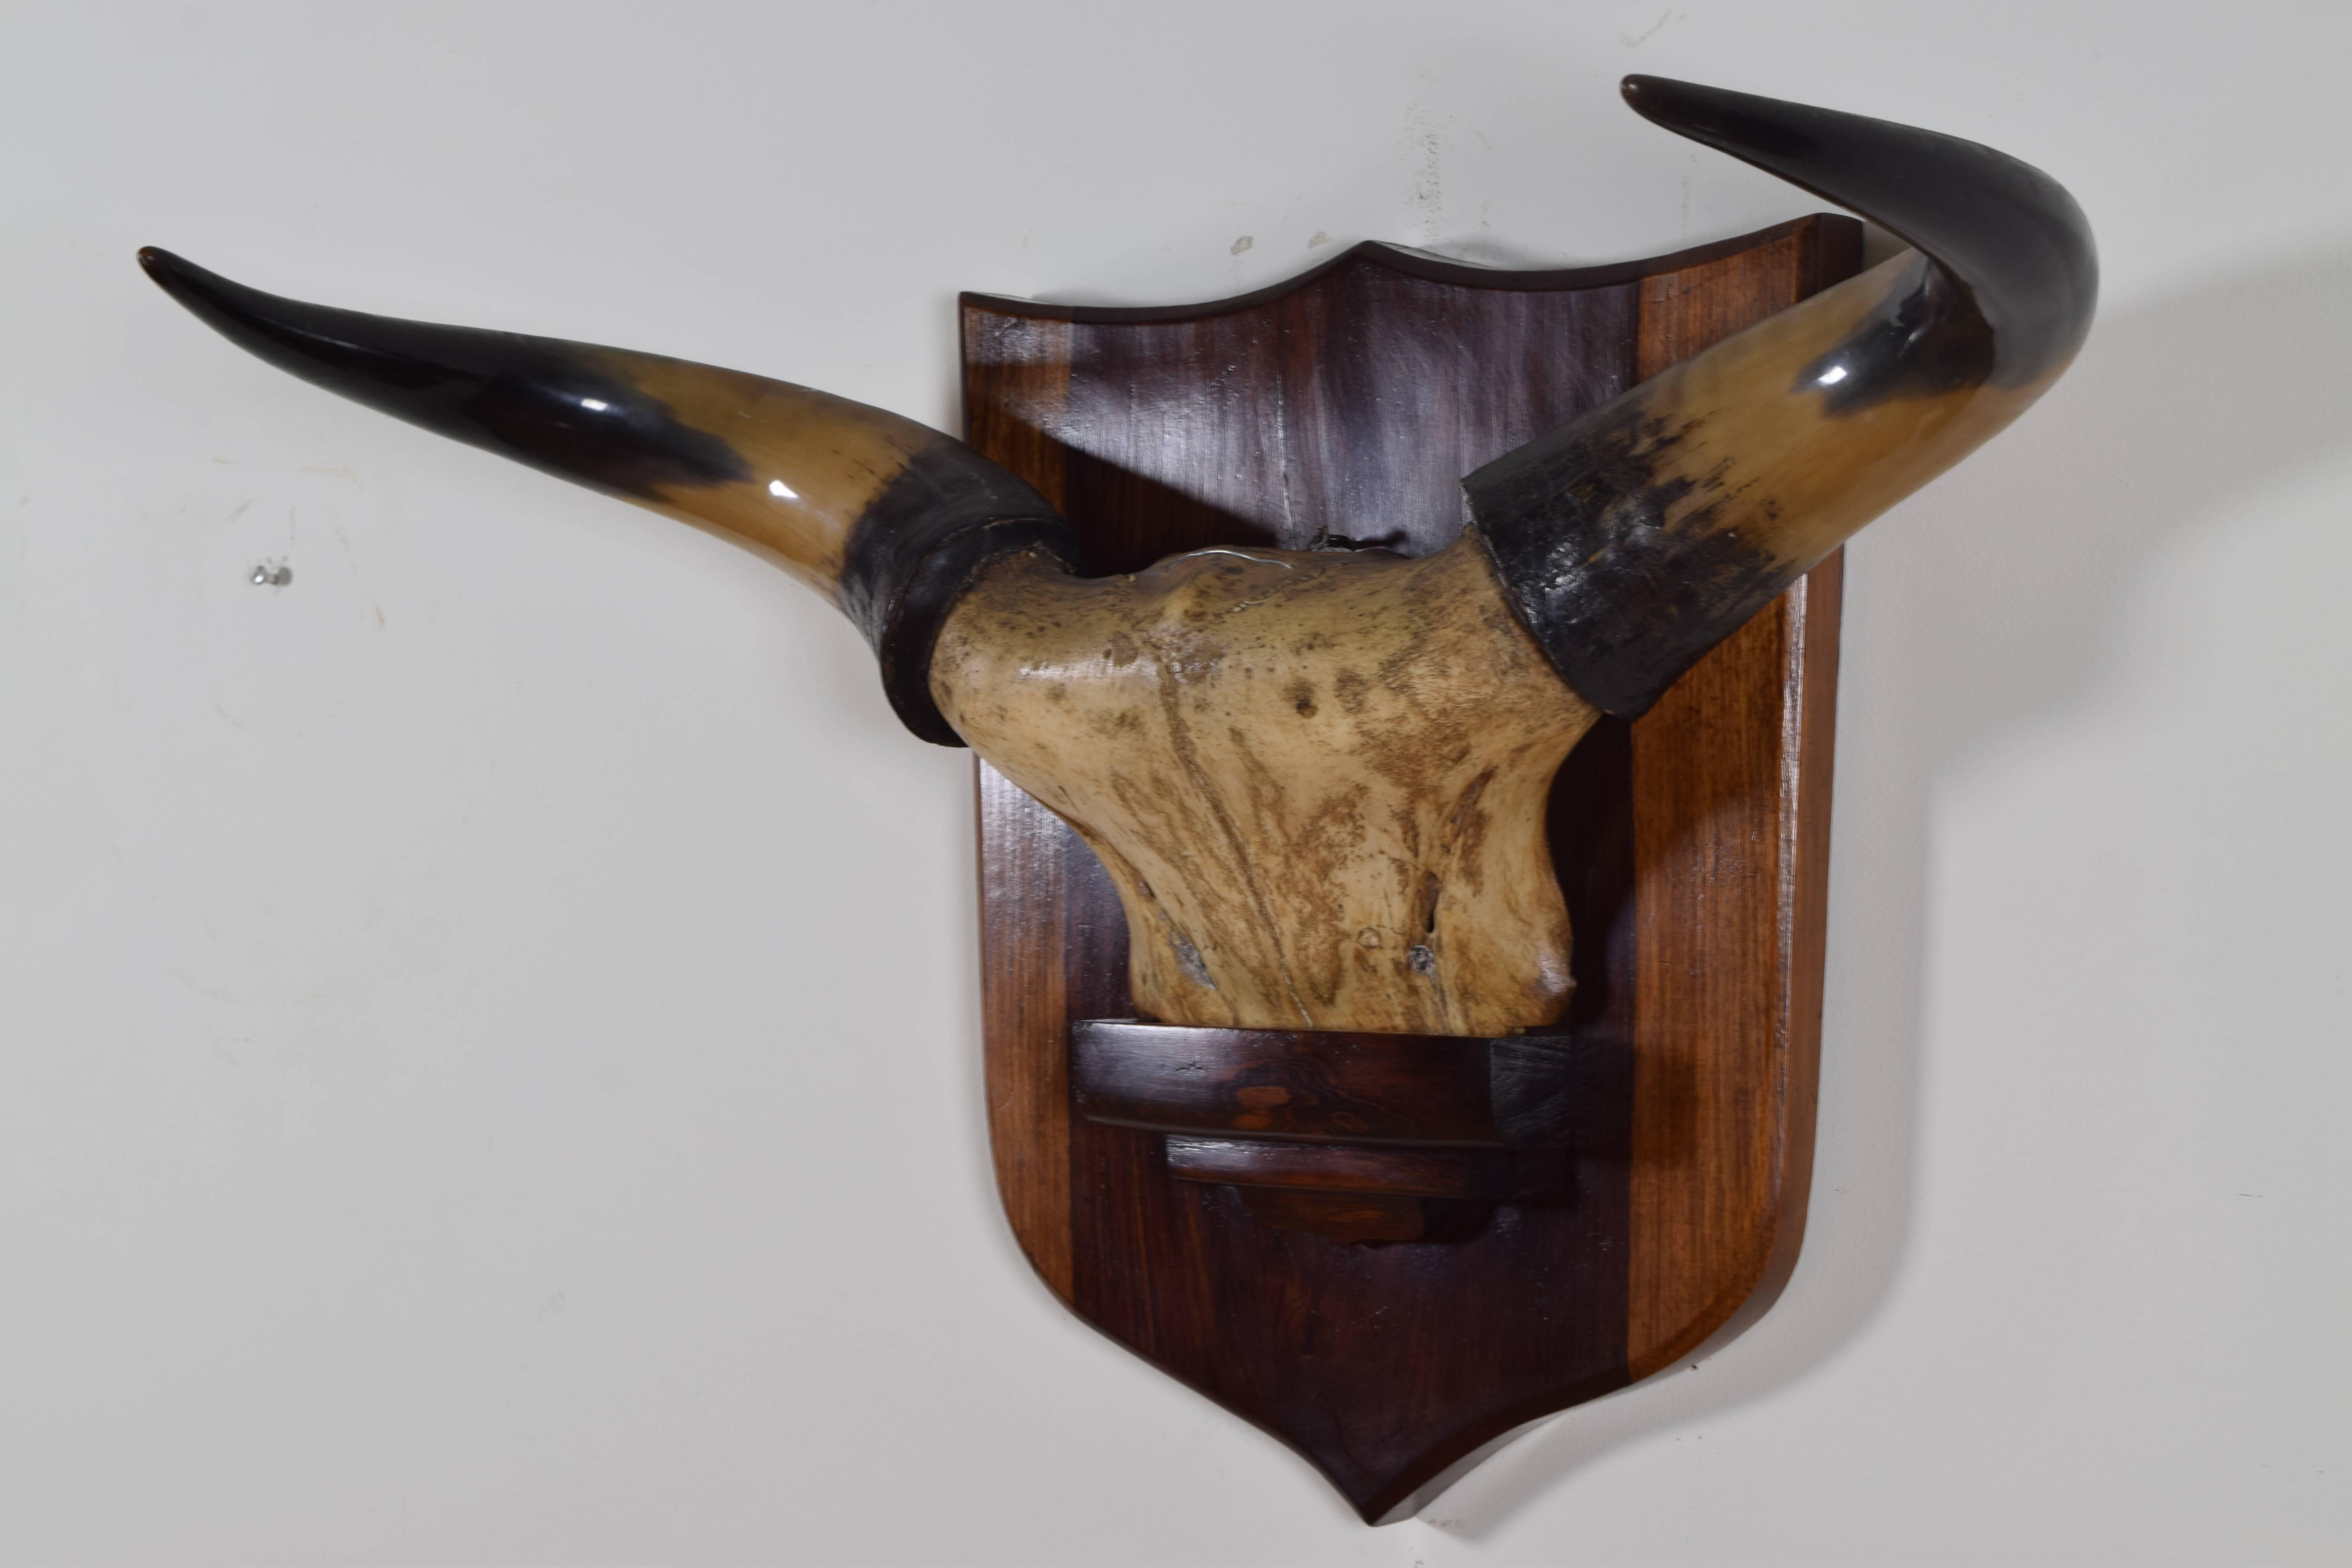 The upper section of the skull mounted on a walnut bracket-form backplate with a molded edge.